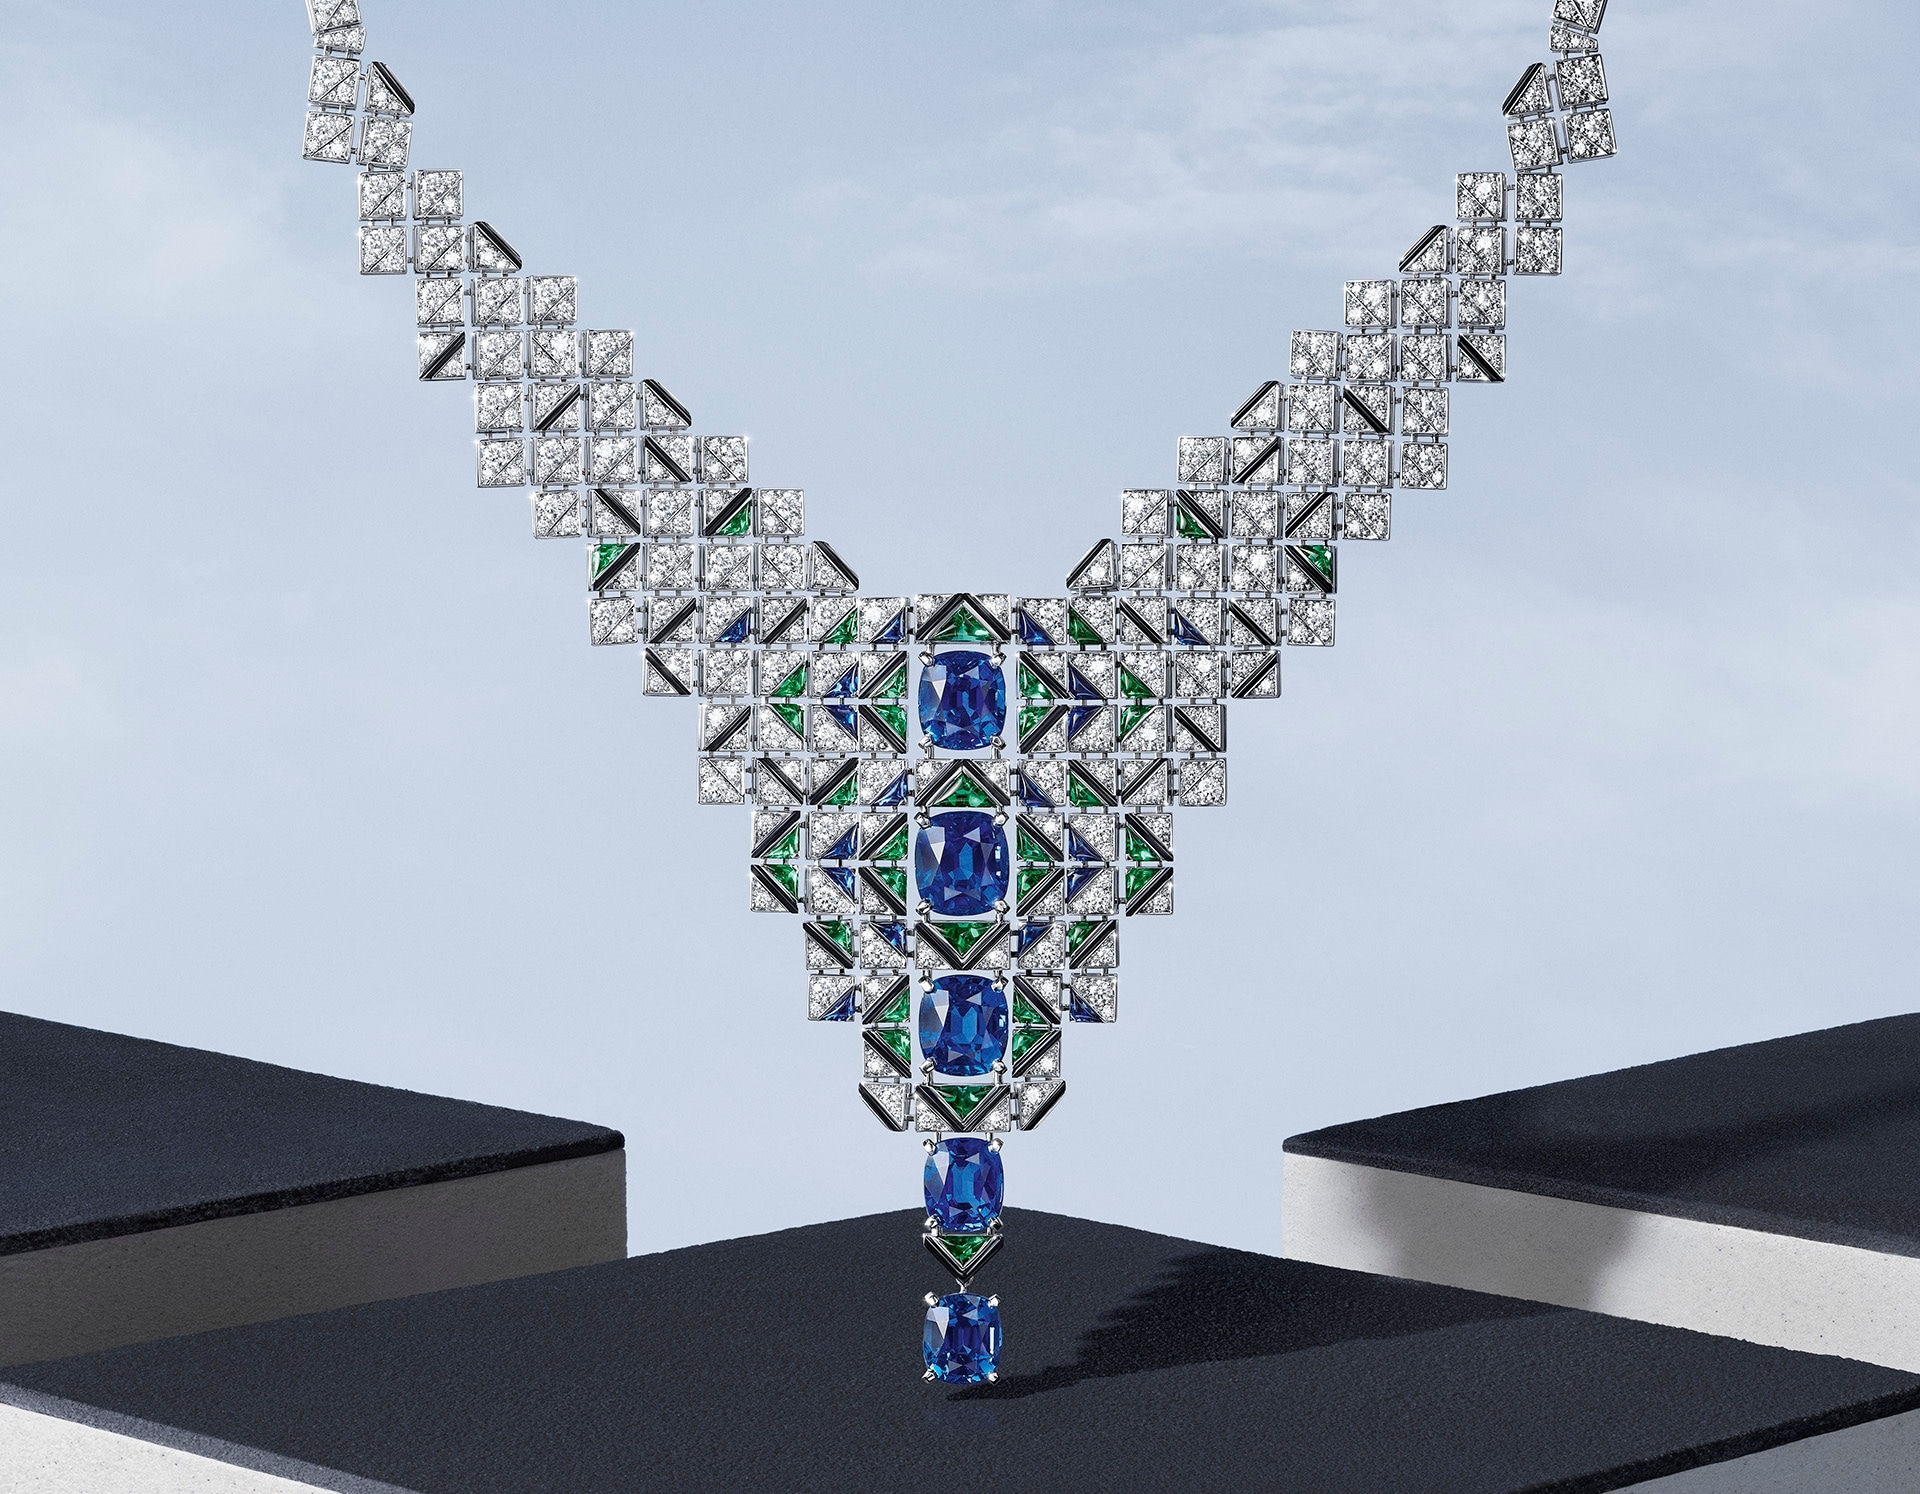 New Cartier high jewellery collection Le Voyage Recommencé